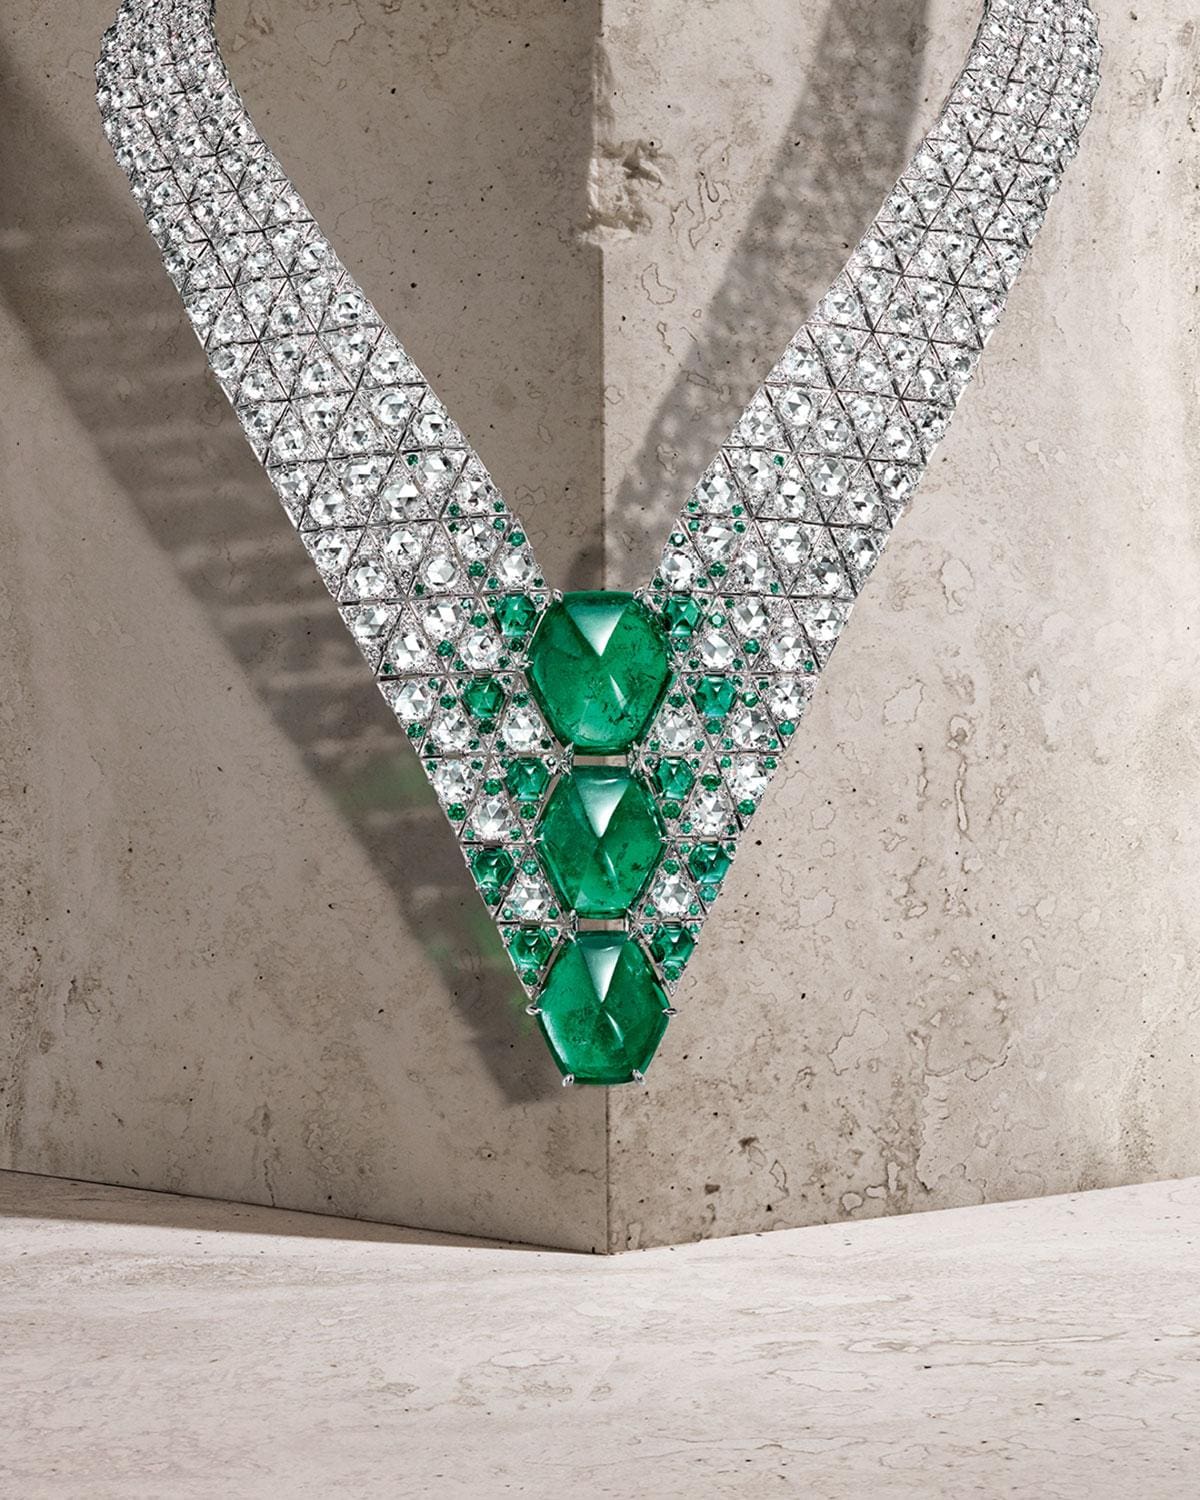 The Most Jaw-Dropping High-Jewelry Collections Revealed This Month - Galerie